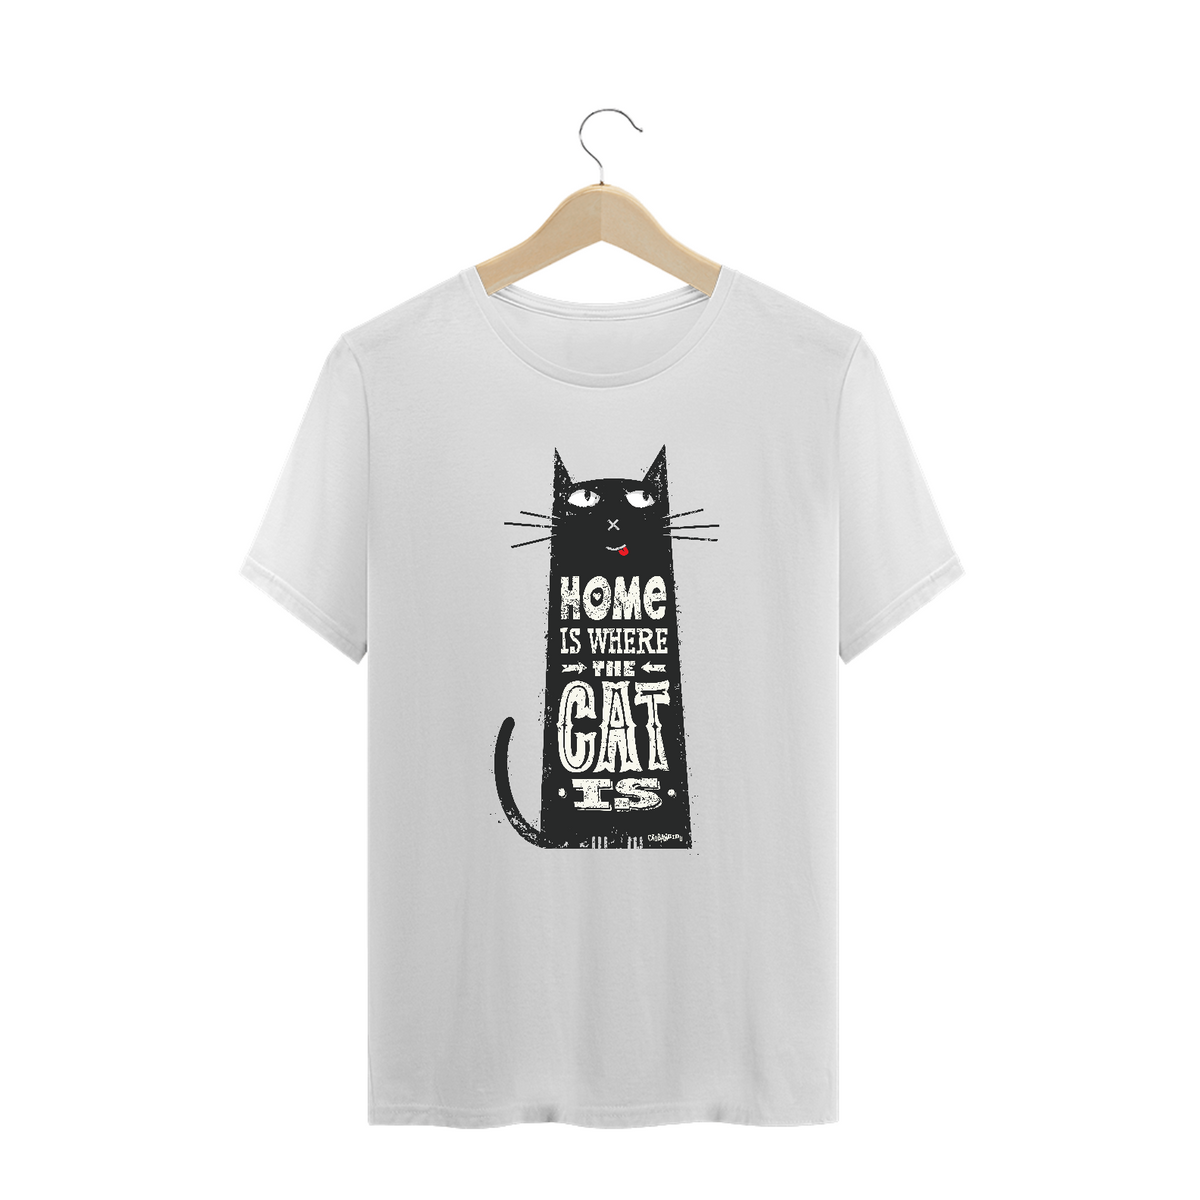 Nome do produto: Camiseta Plus Size Home Is Where The Cat Is